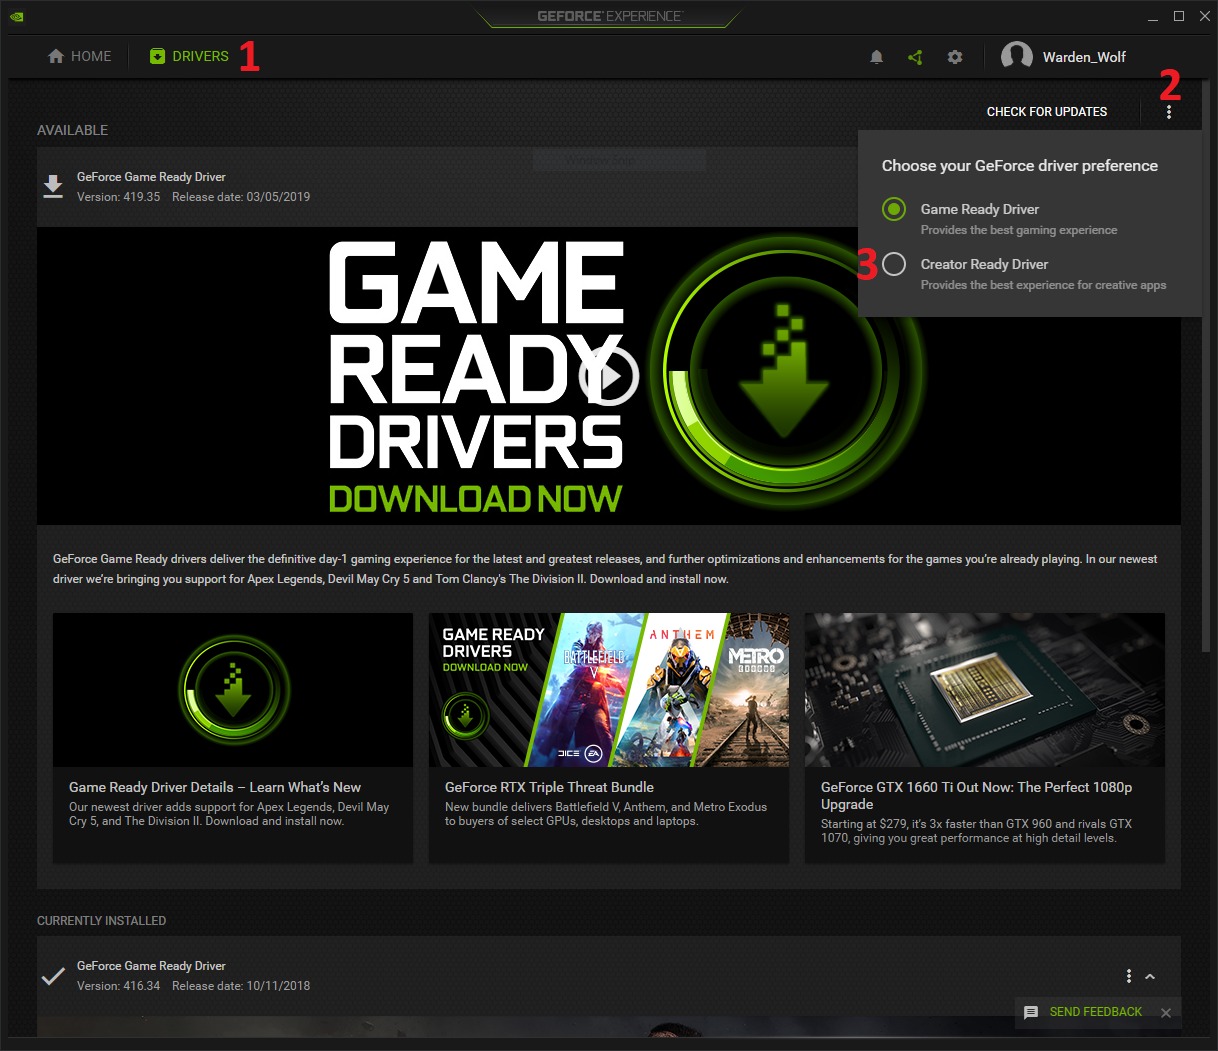 How to select NVIDIA Creator Ready Drivers for GeForce and Titan video cards in the GeForce Experience application